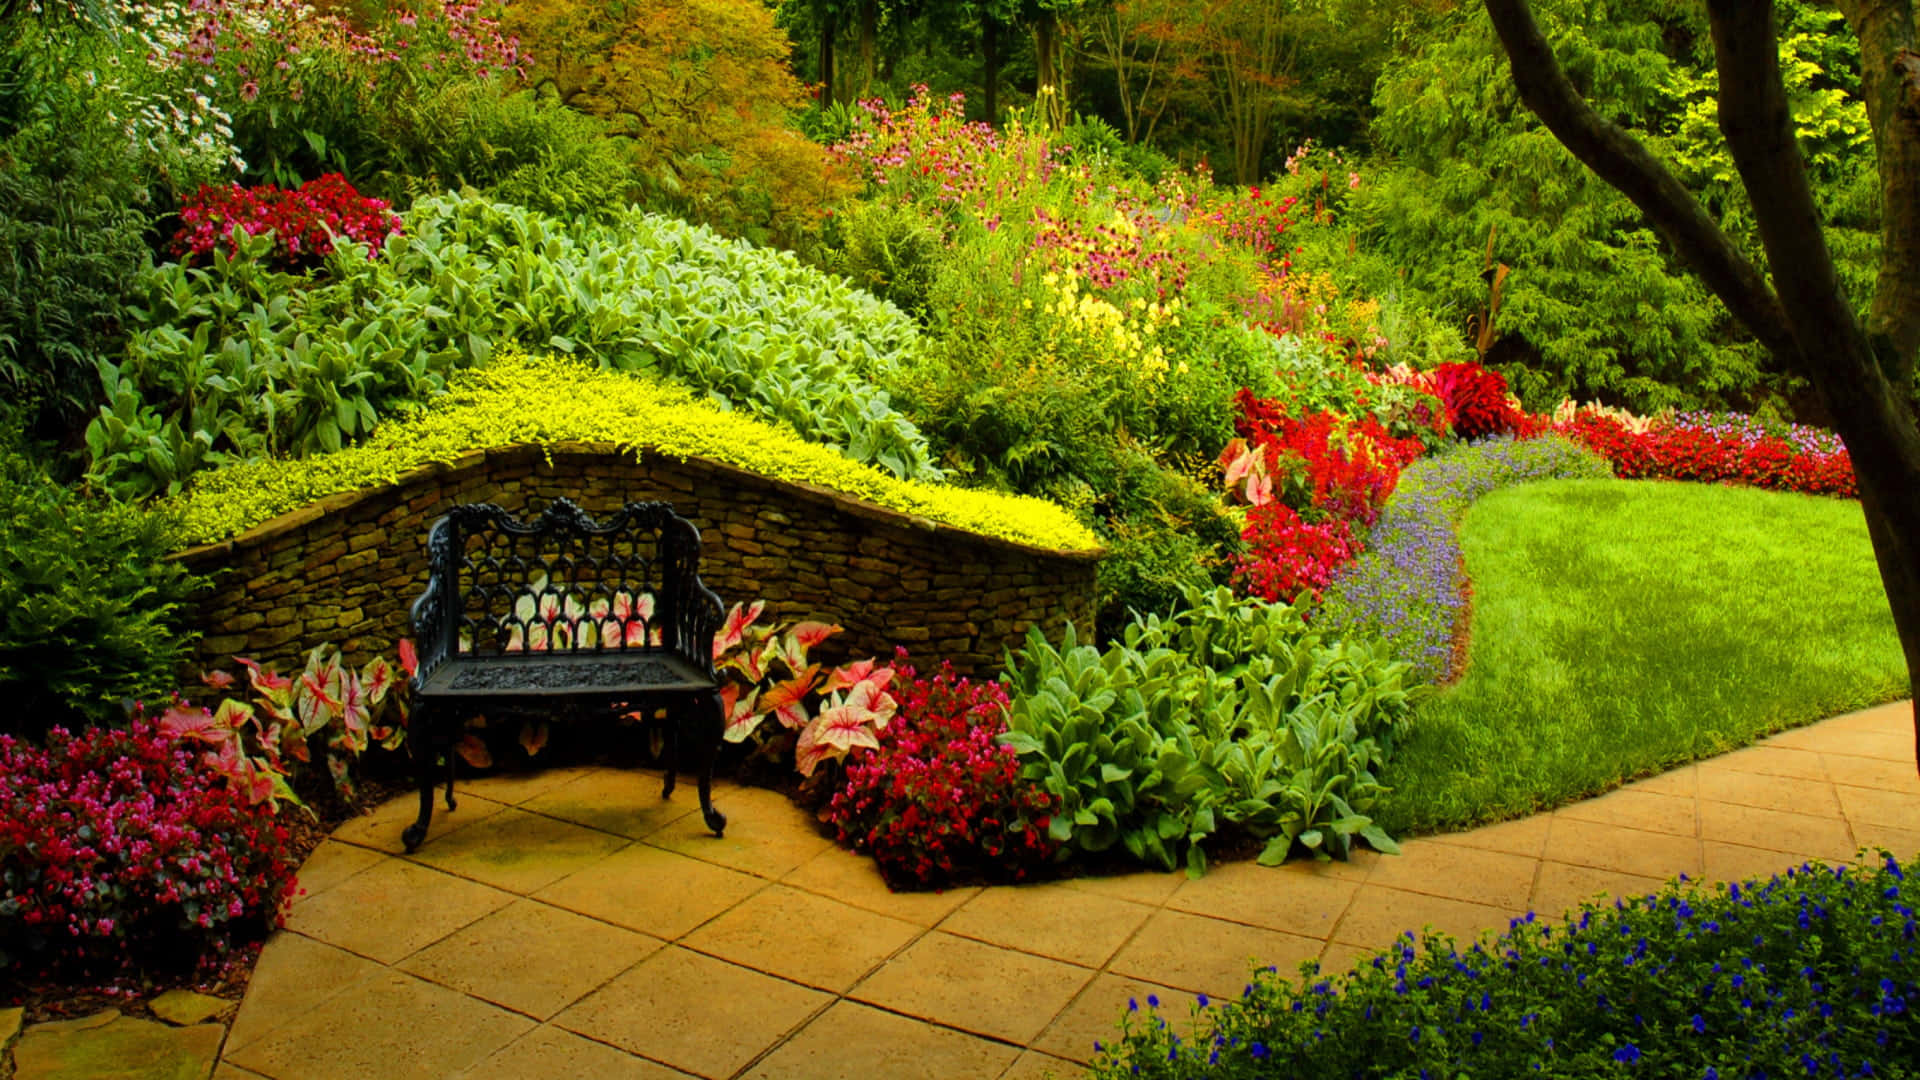 a bench is sitting in a garden